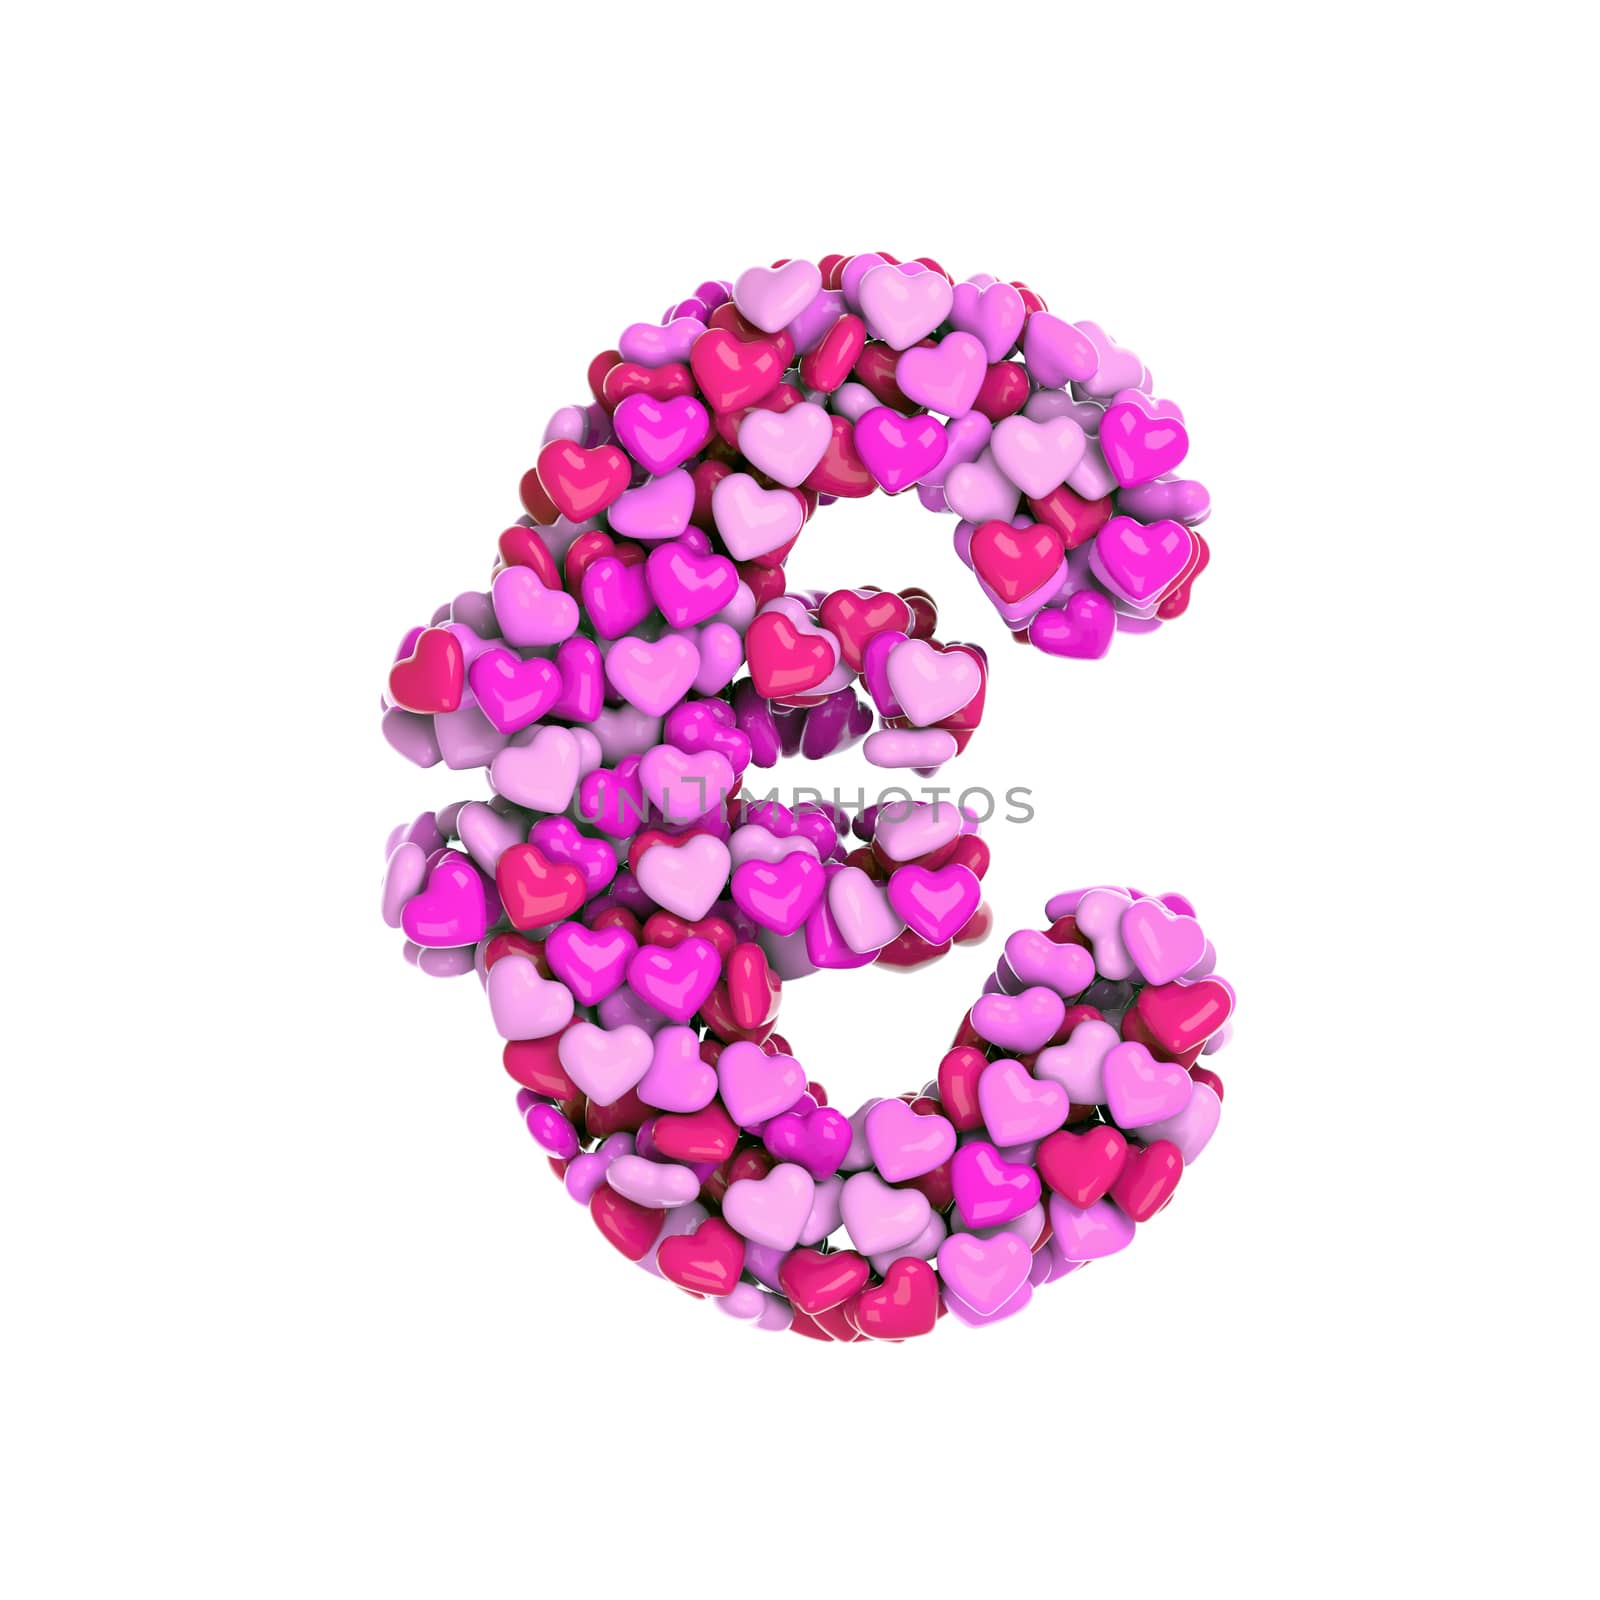 Valentine euro currency sign - 3d pink hearts symbol isolated on white background. This alphabet is perfect for creative illustrations related but not limited to Love, passion, wedding...